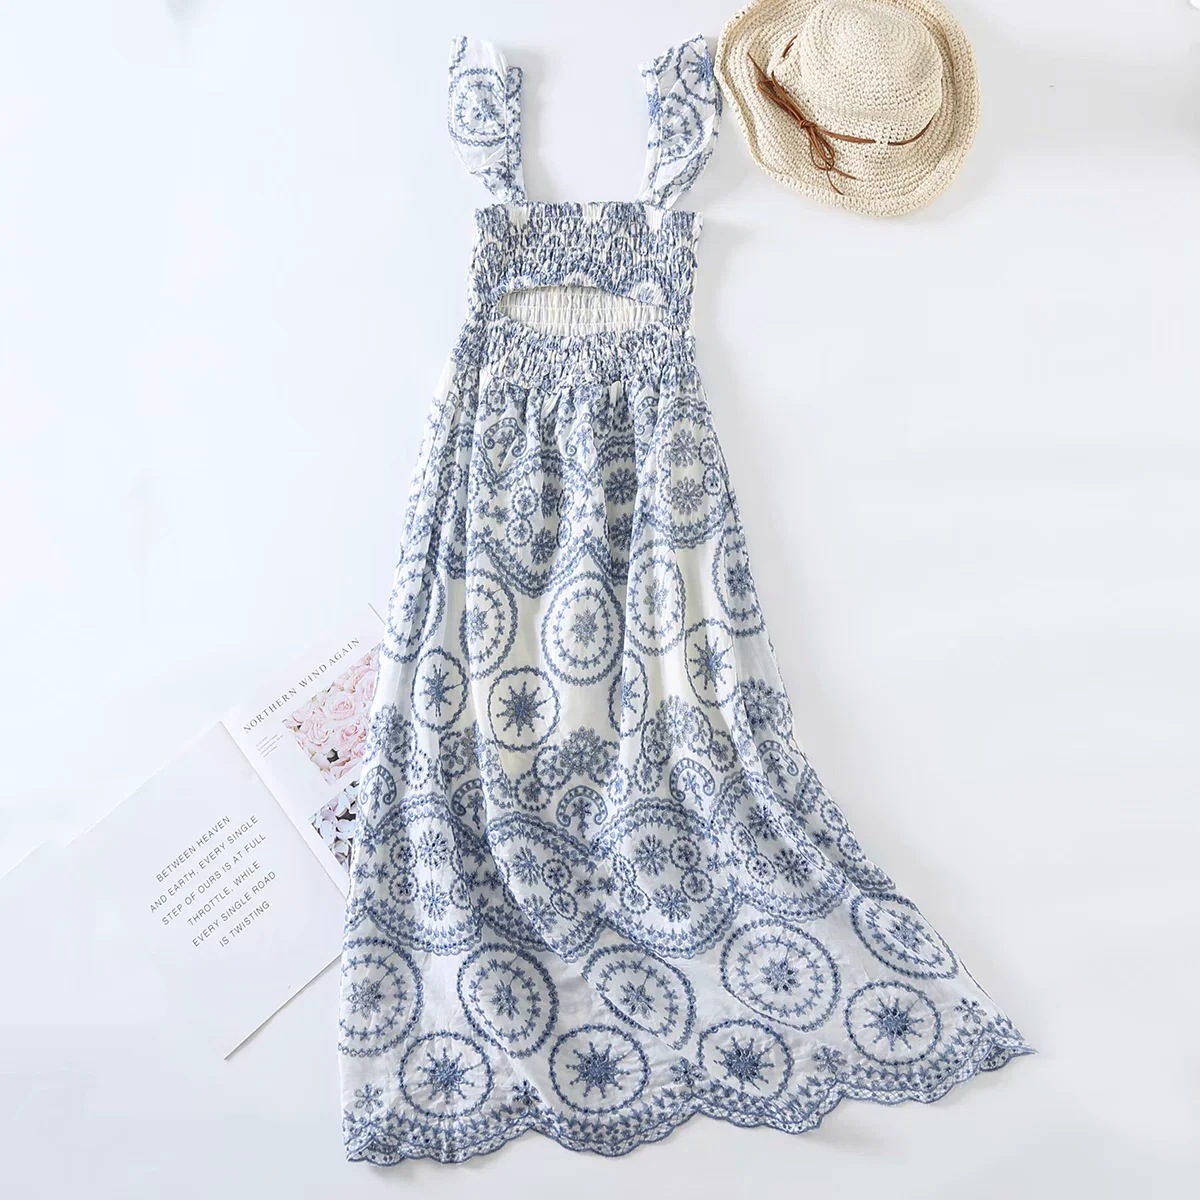 Embroidery Cut-out Dress Ruffle Sleeves Open Back Elastic Waist Large Swing Skirt